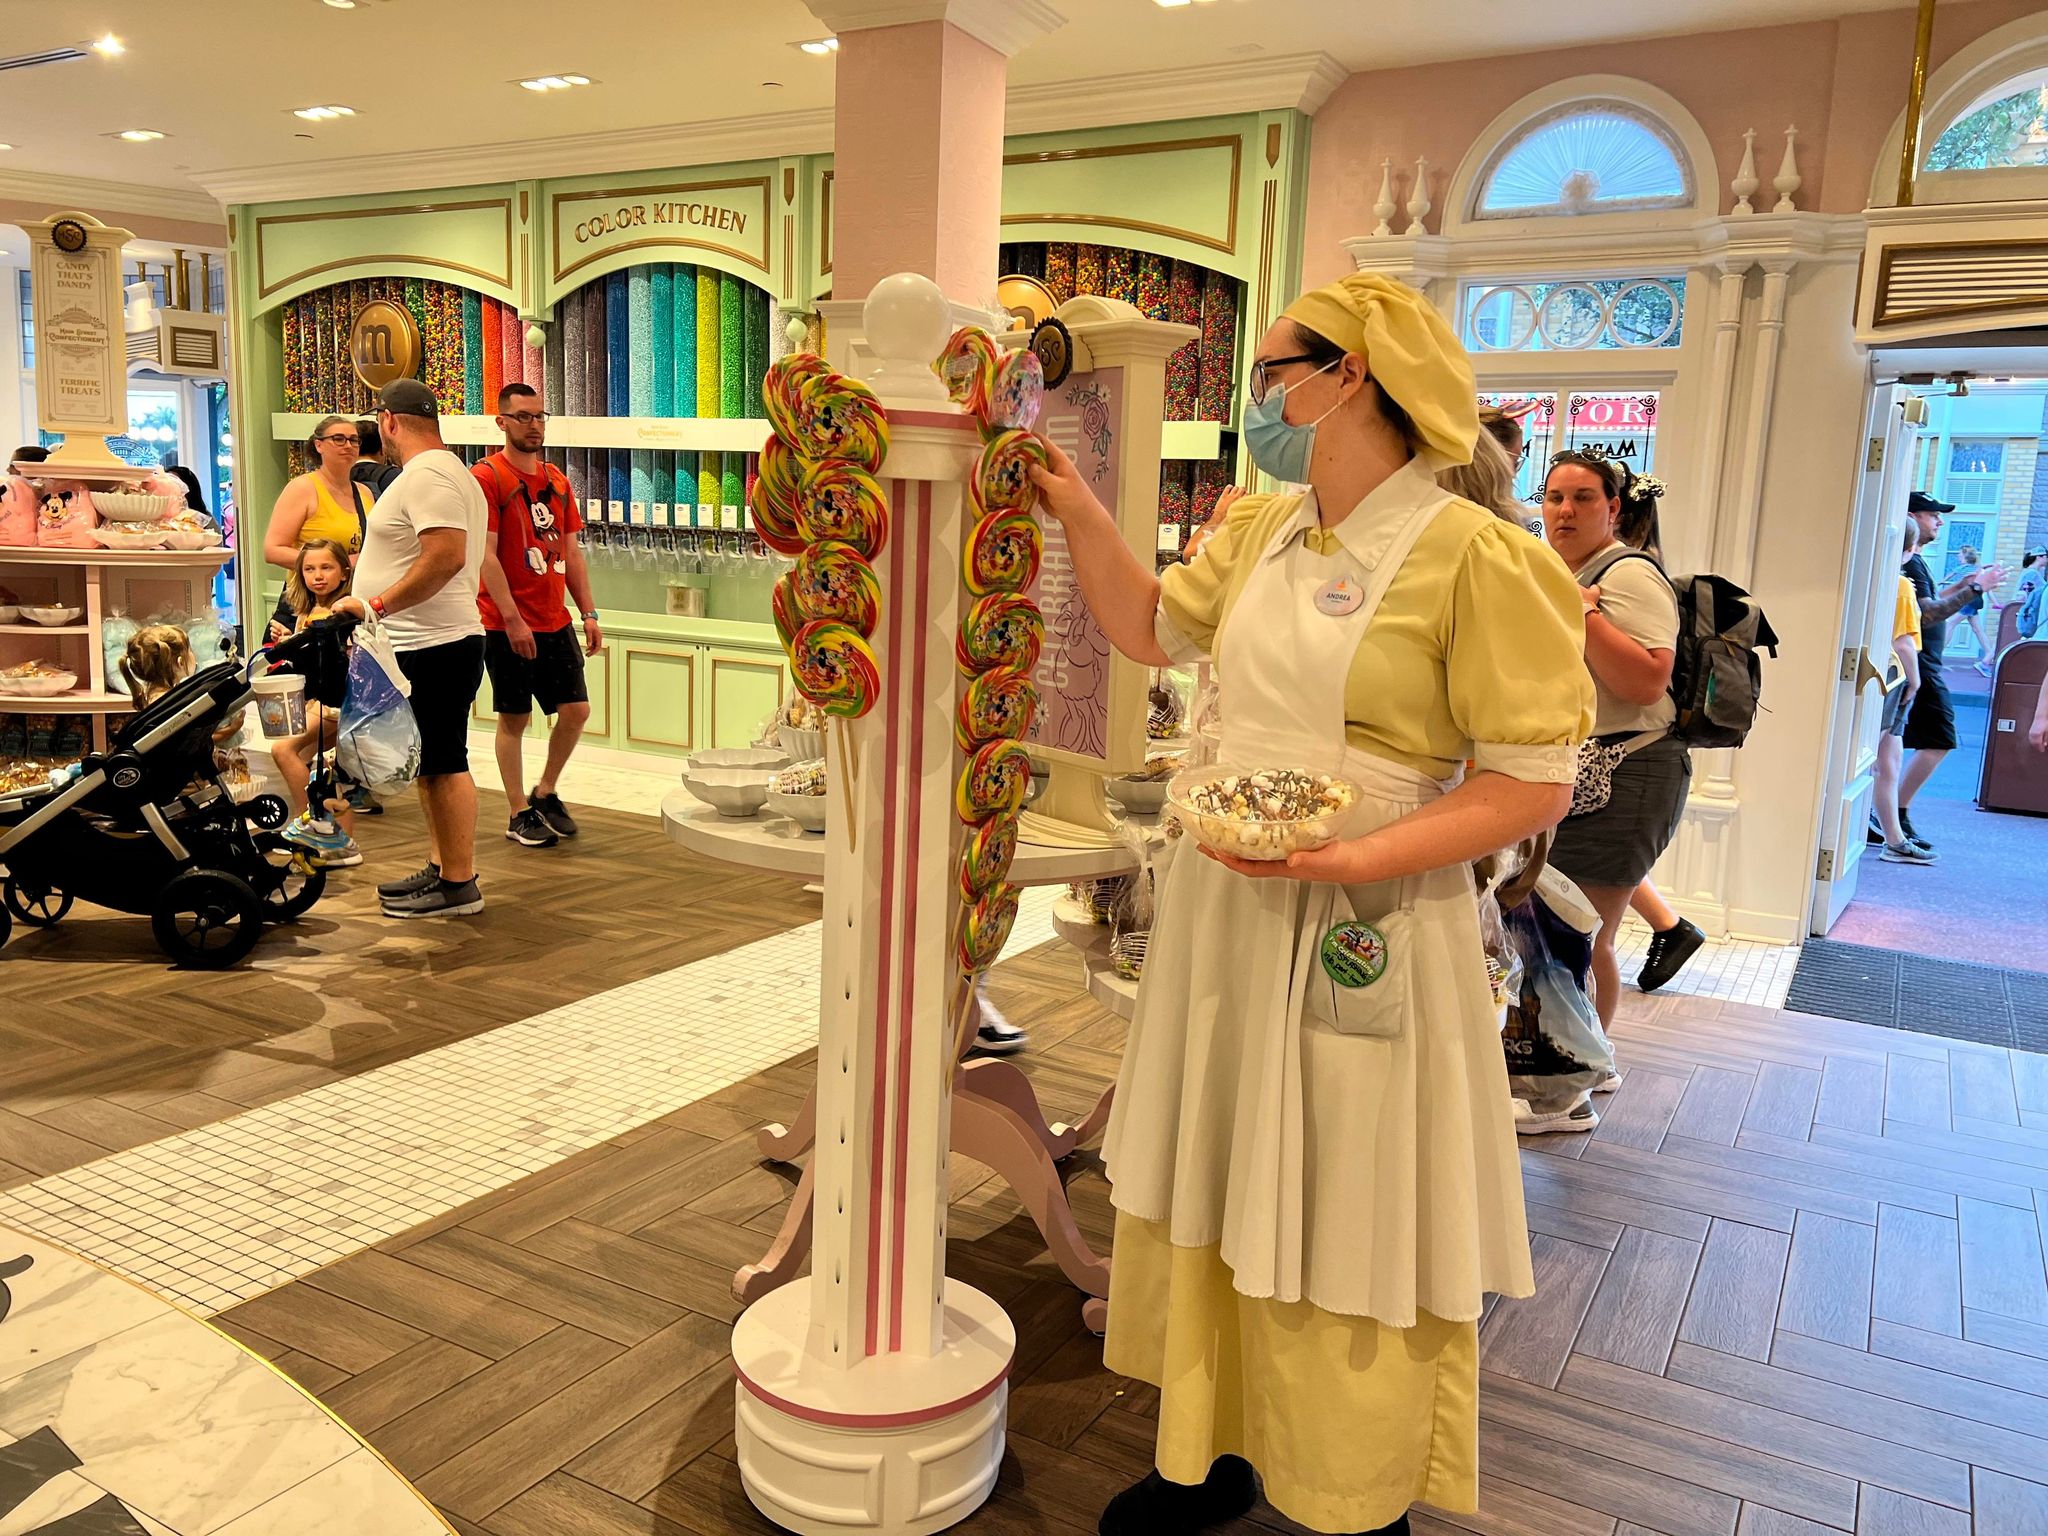 See What's Cooking In the Beautifully Remodeled Main Street Confectionary Magic Kingdom 23